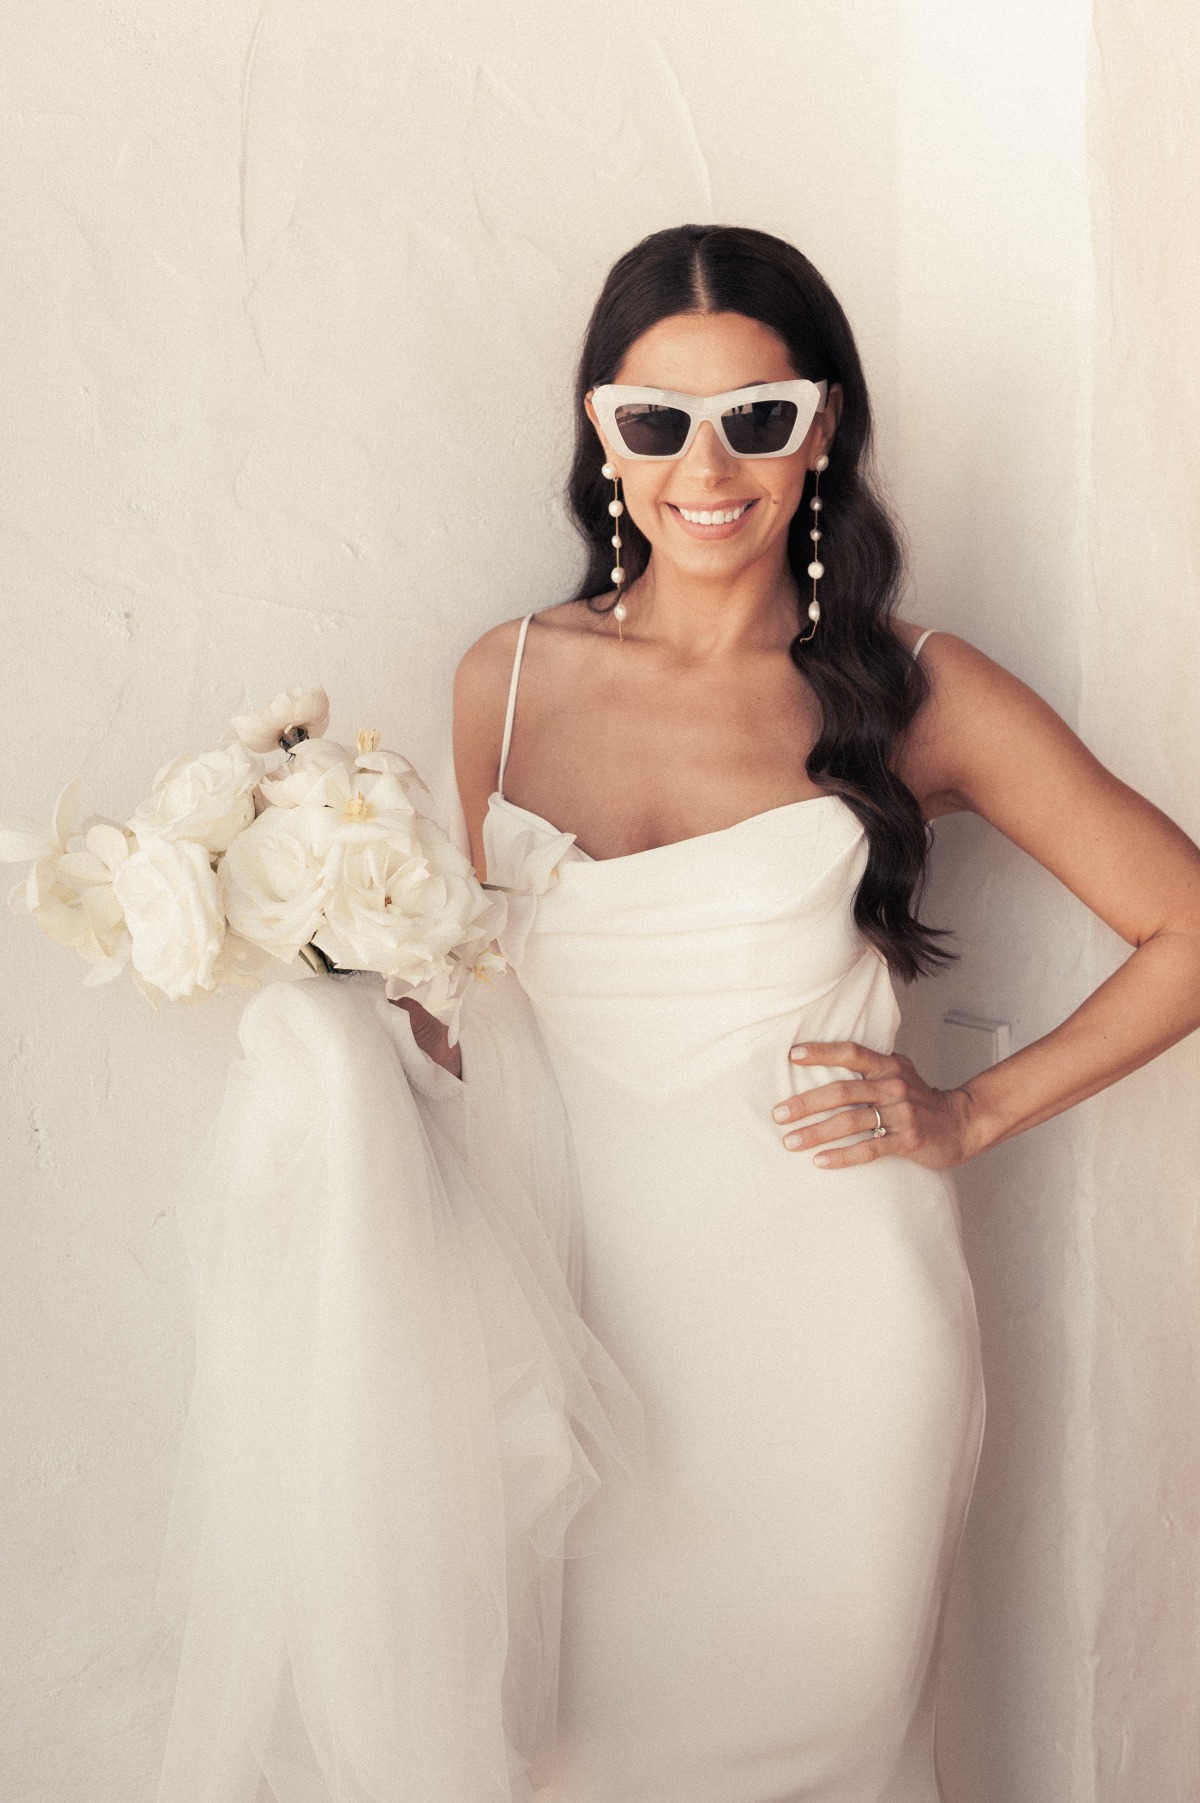 Bridal portrait holding bouquet and wearing sunglasses against white wall